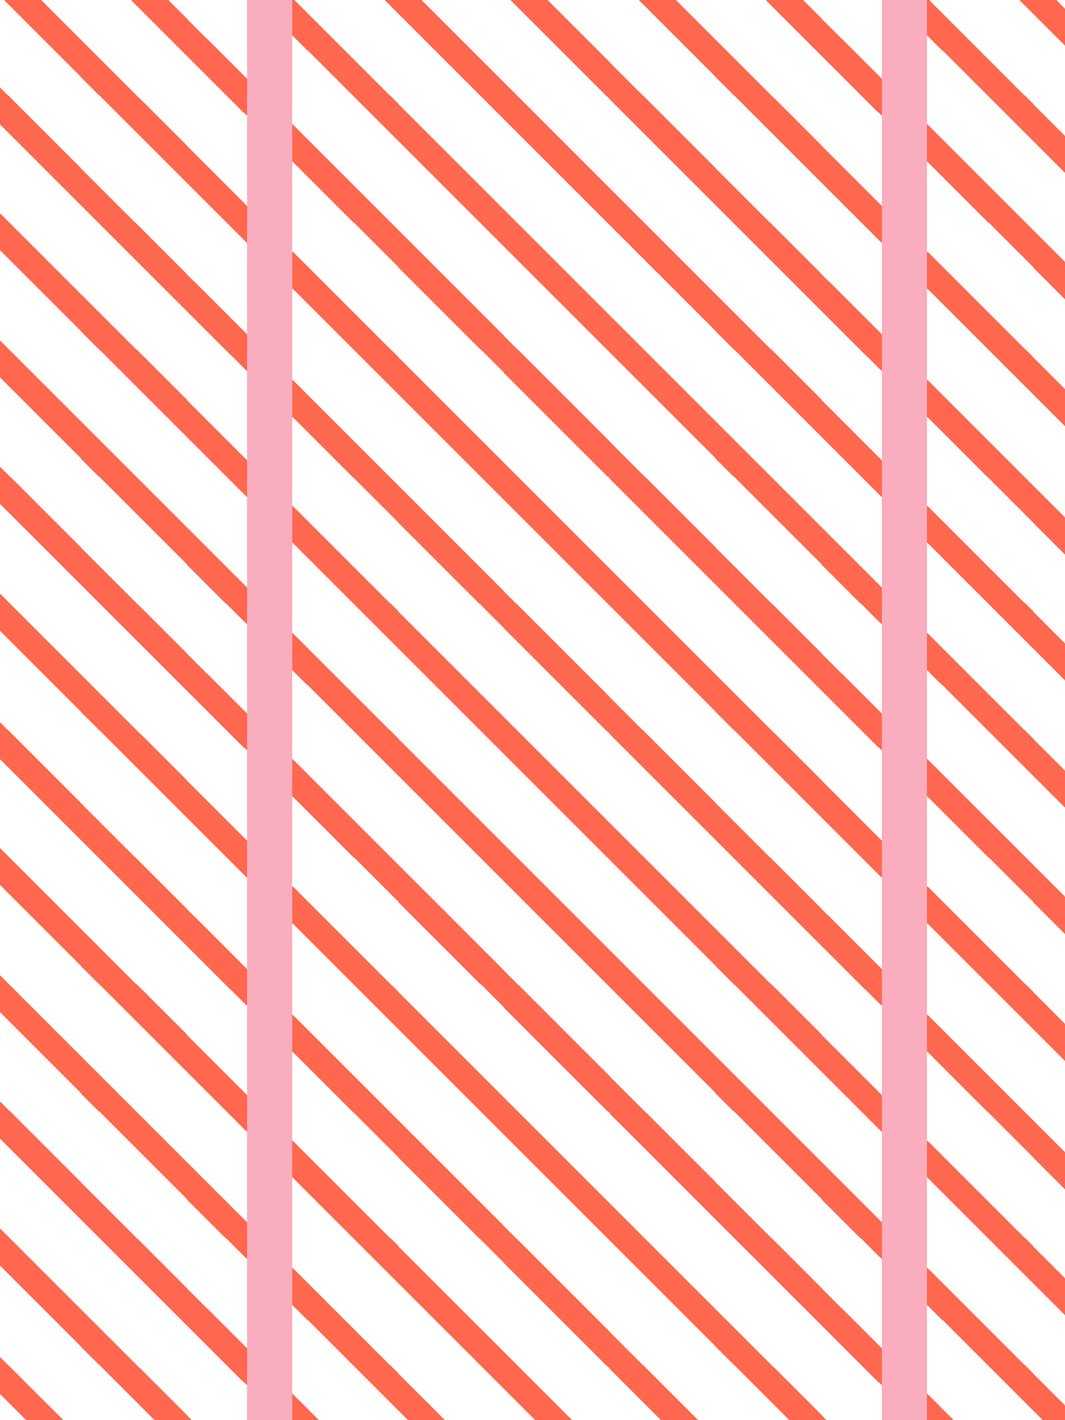 'Barbie™ Dreamhouse Stripes' Wallpaper by Barbie™ - Persimmon Pink